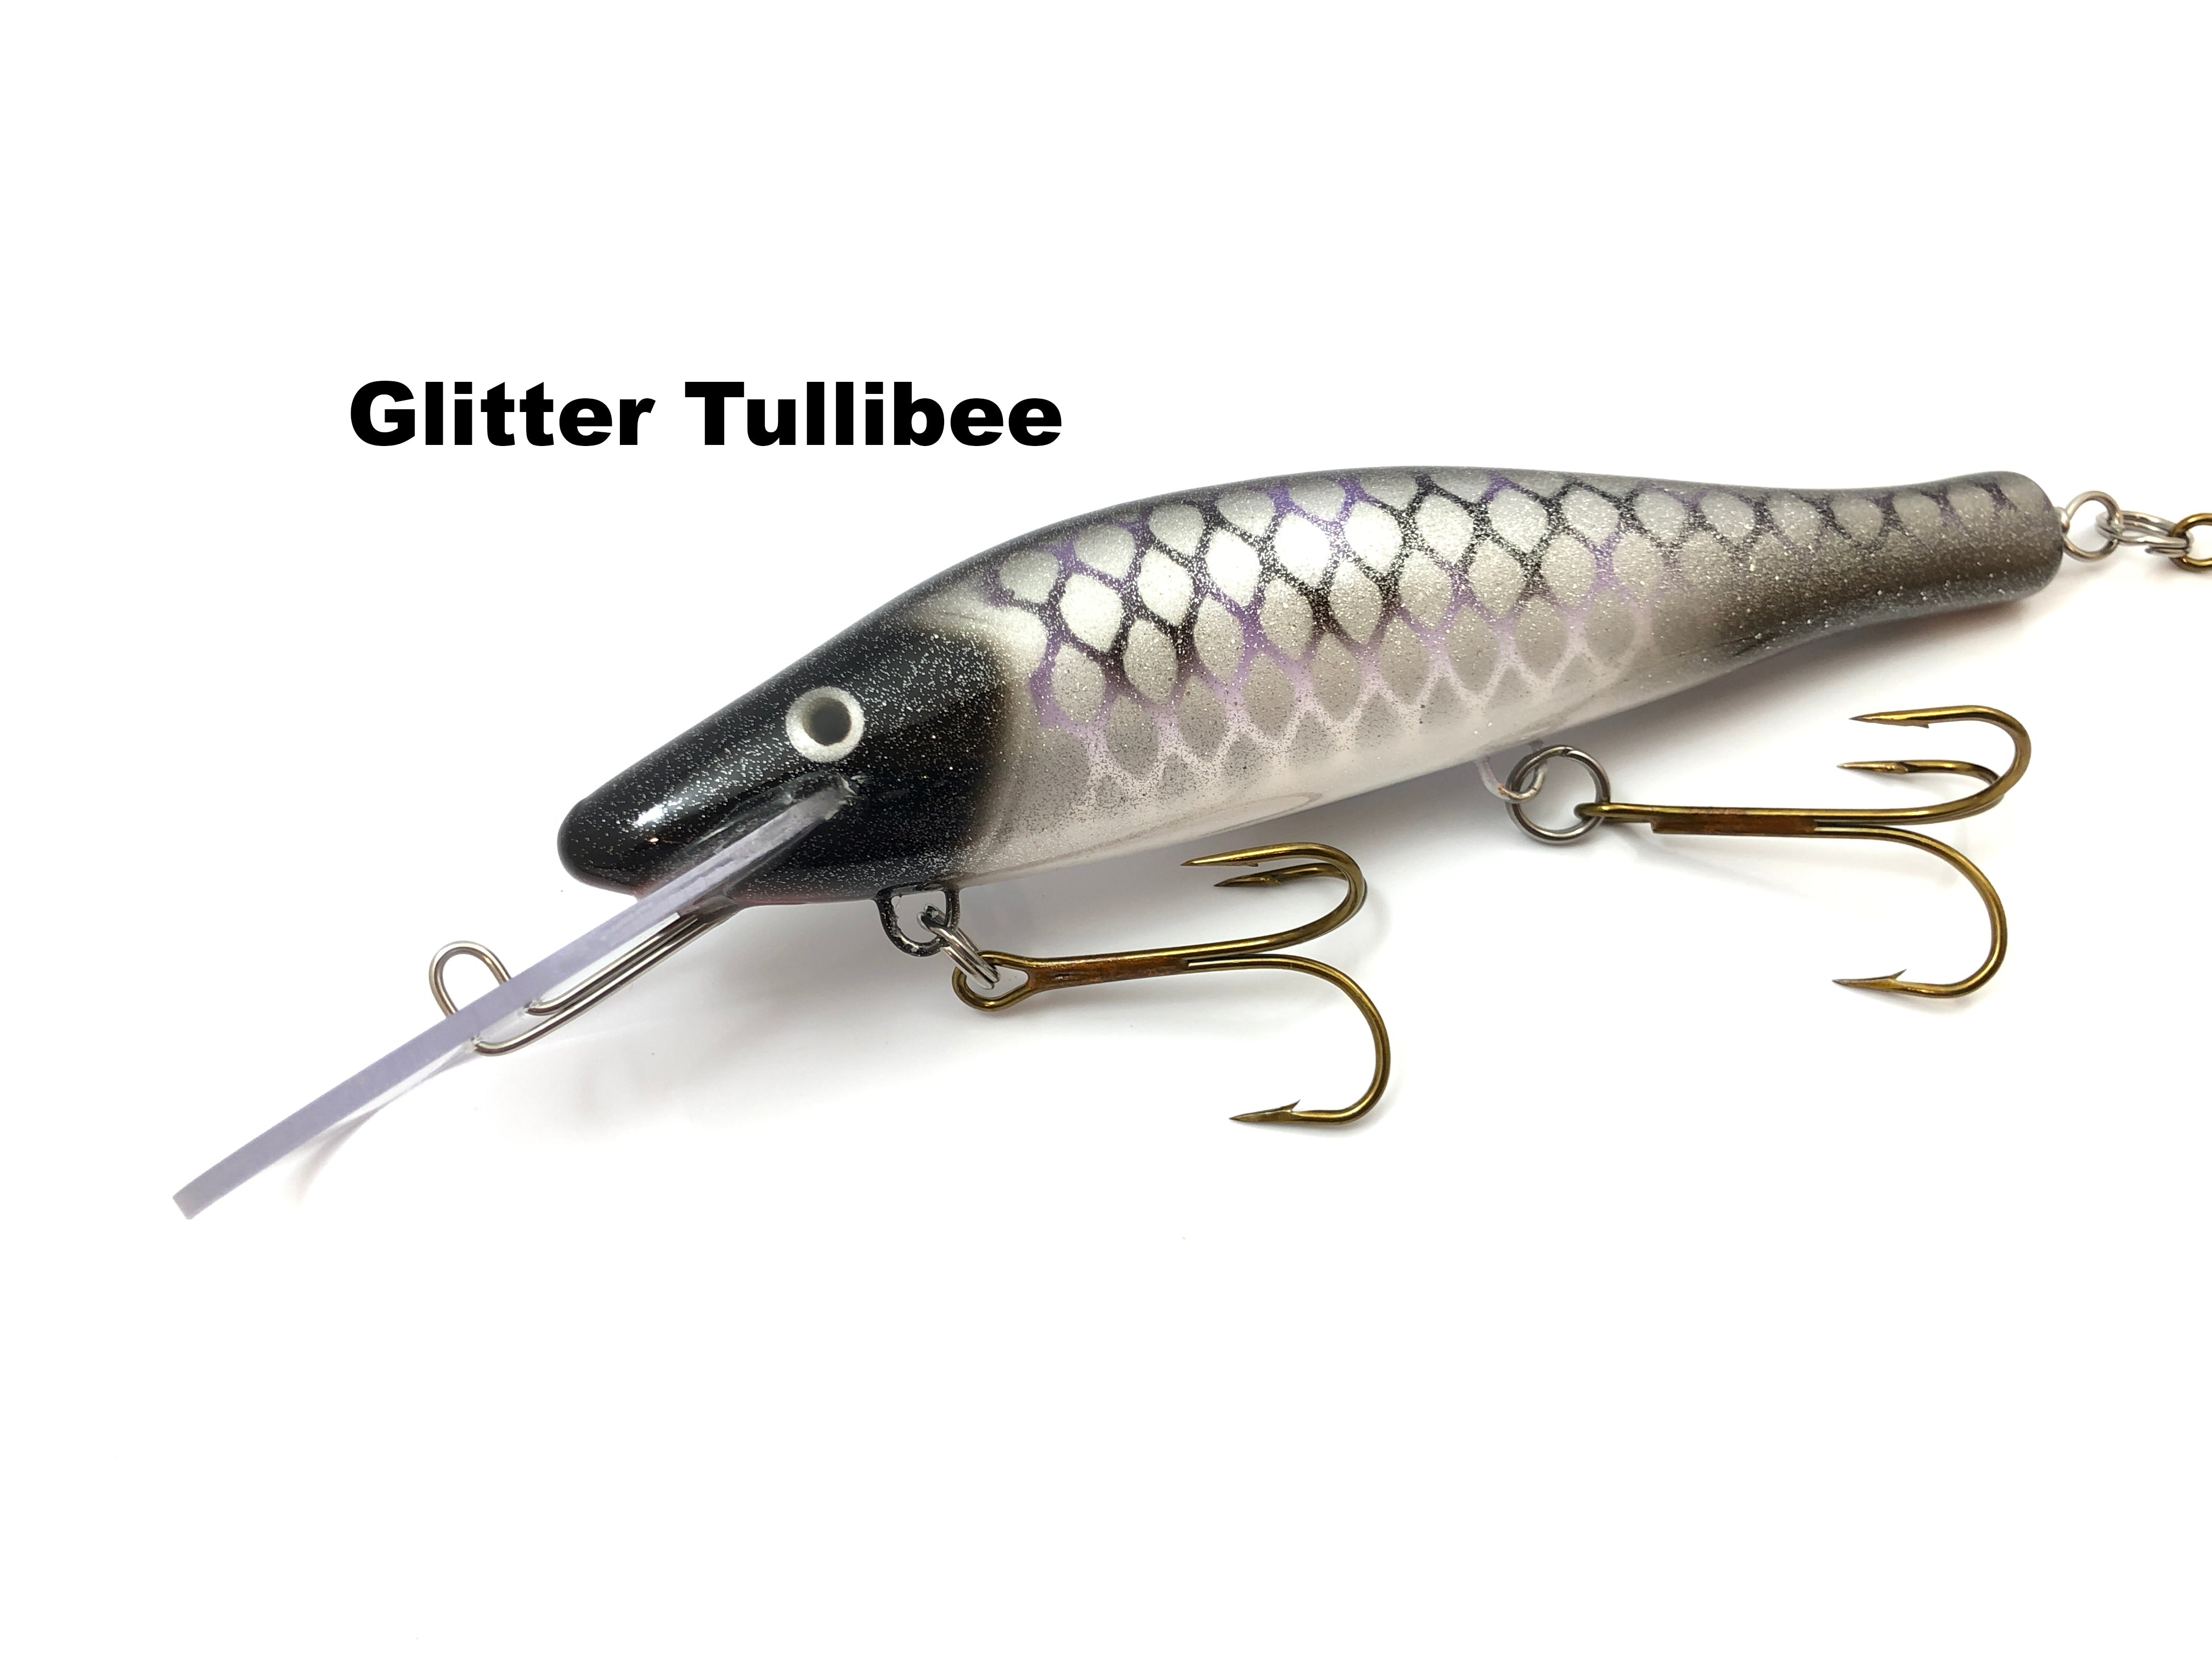 Blade Bait Fishing Lure - Perch Pattern Sticker for Sale by